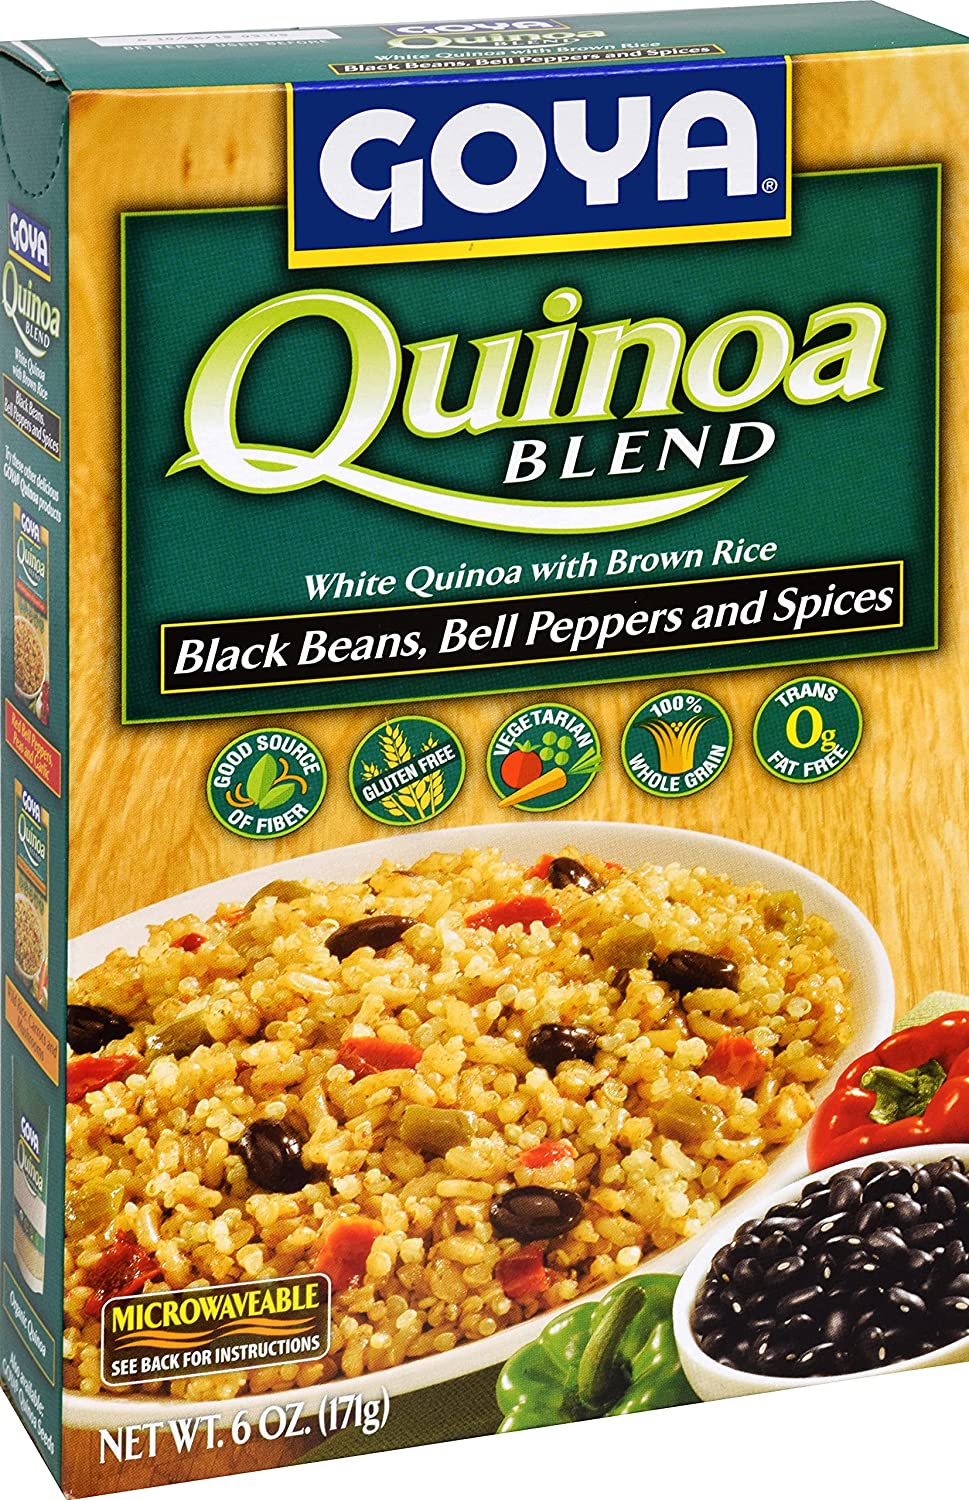 Goya Quinoa Blend with Black Beans , Bell Peppers and Spices 6 oz